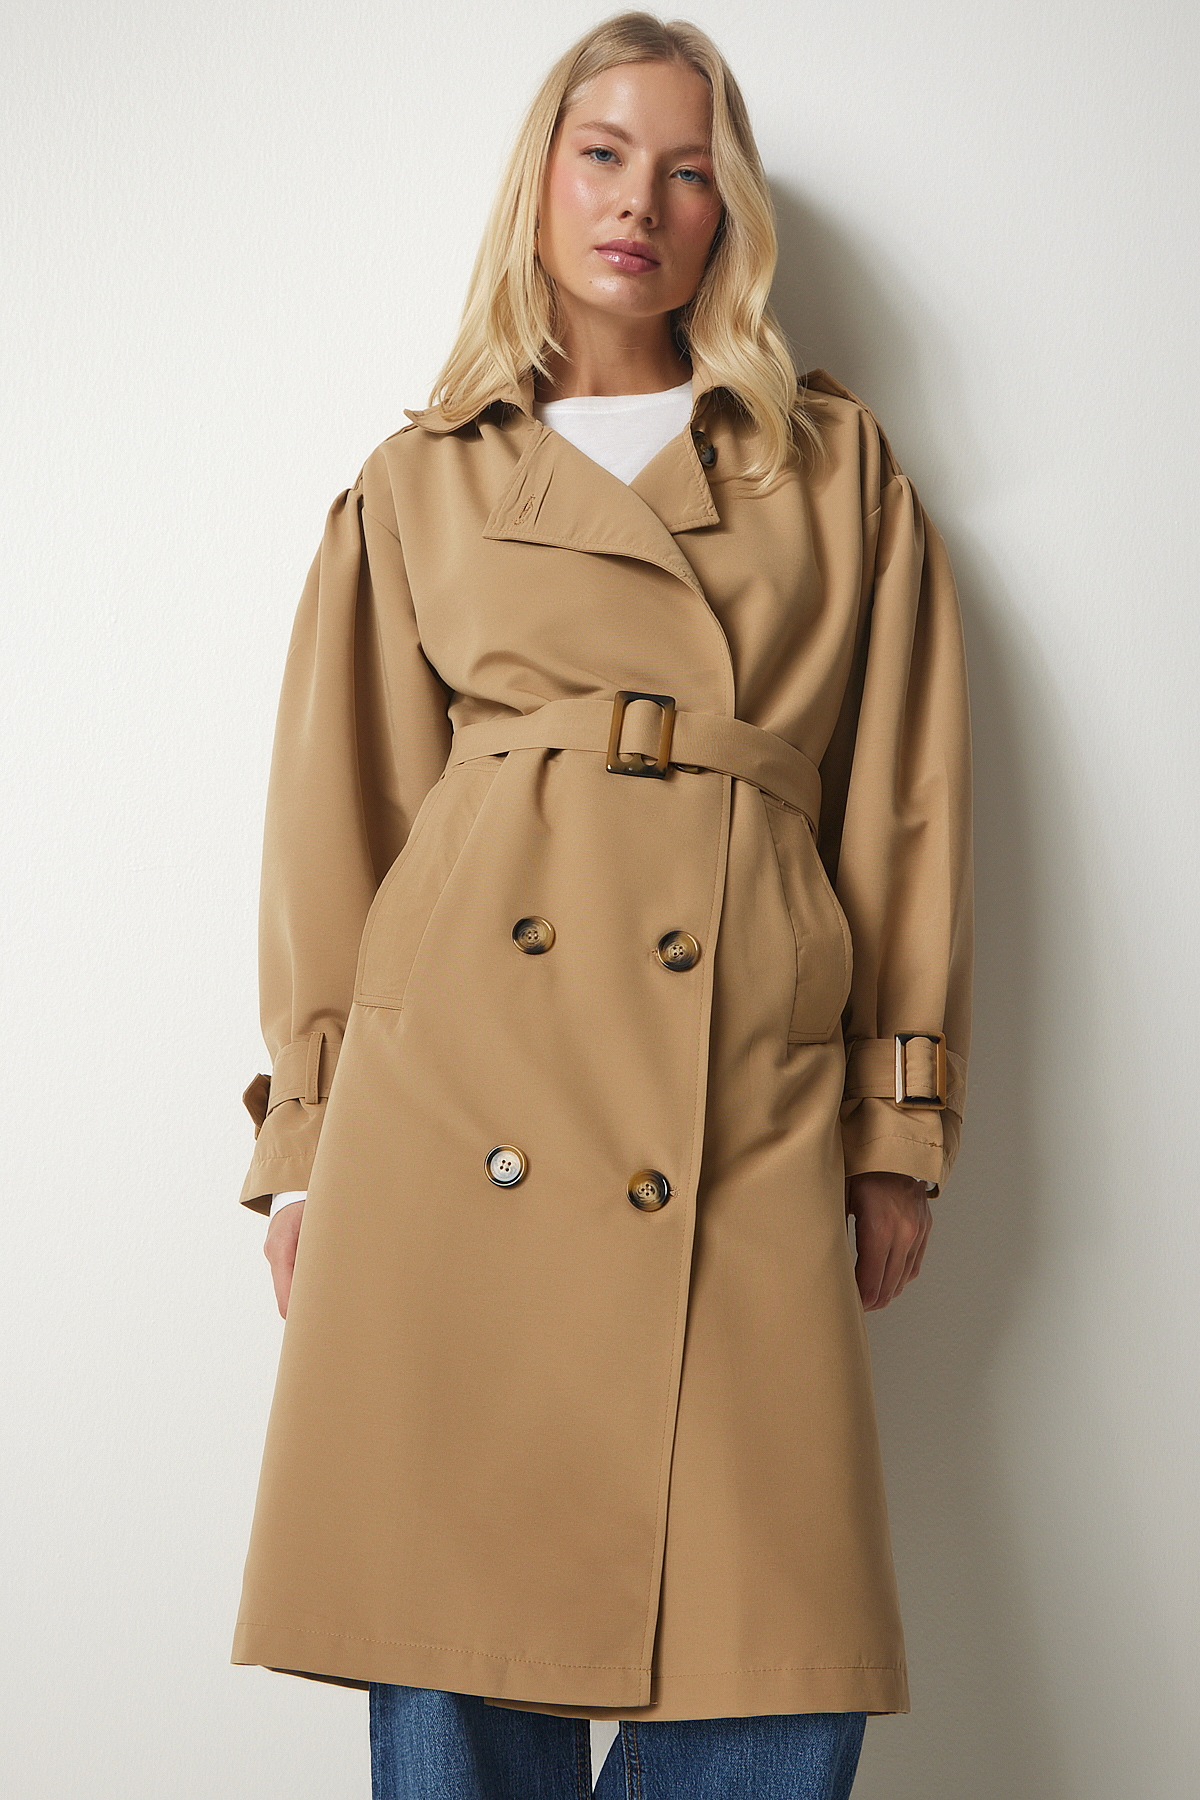 Happiness Istanbul Camel Double-breasted Collar Belted Trench Coat